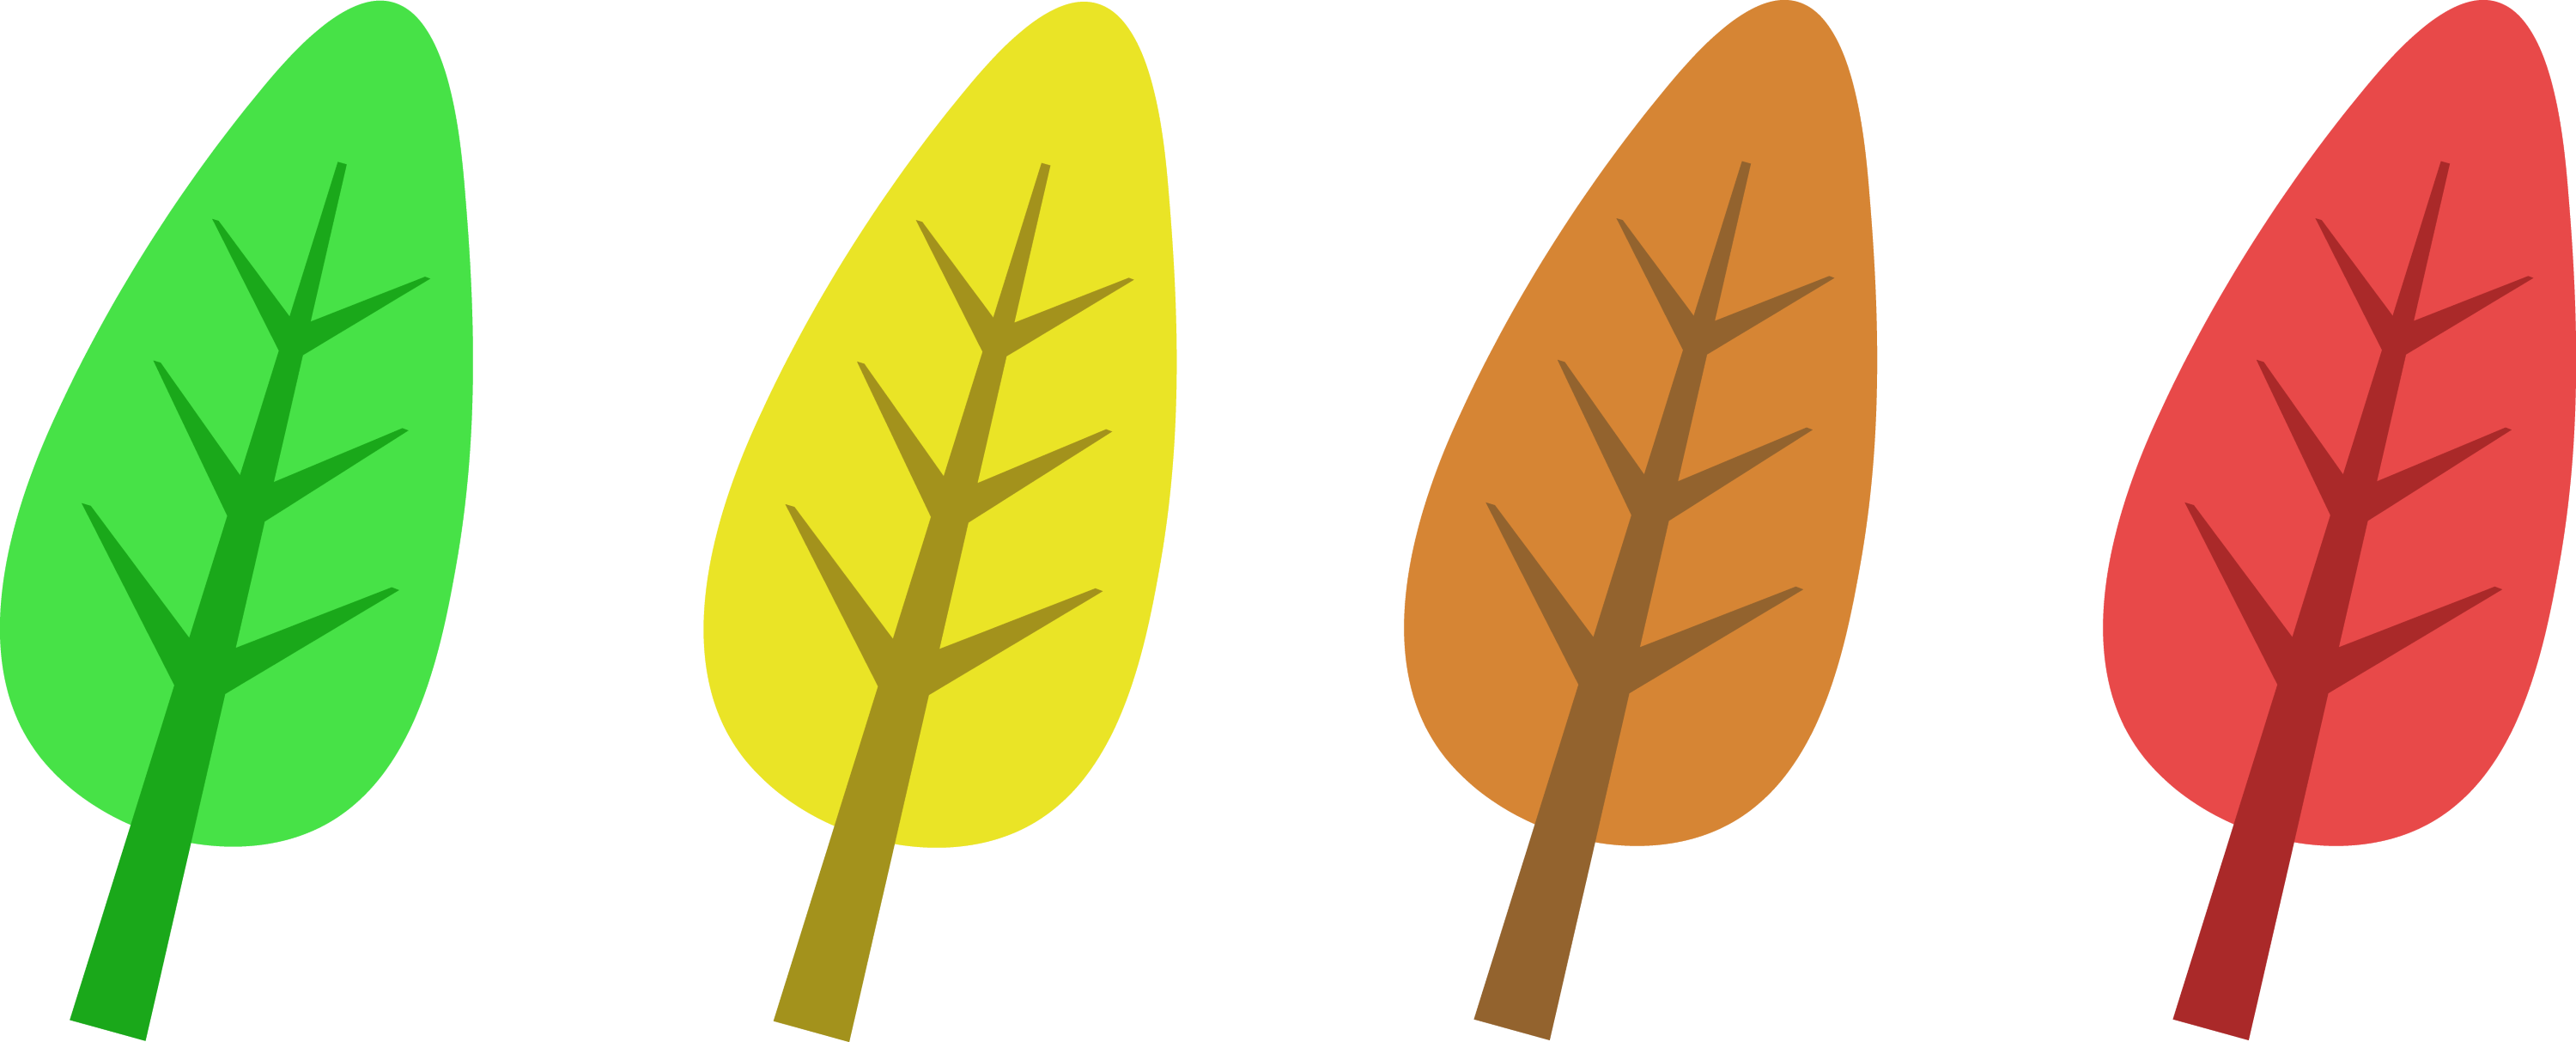 Colored Autumn Tree Leaves - Free Clip Art